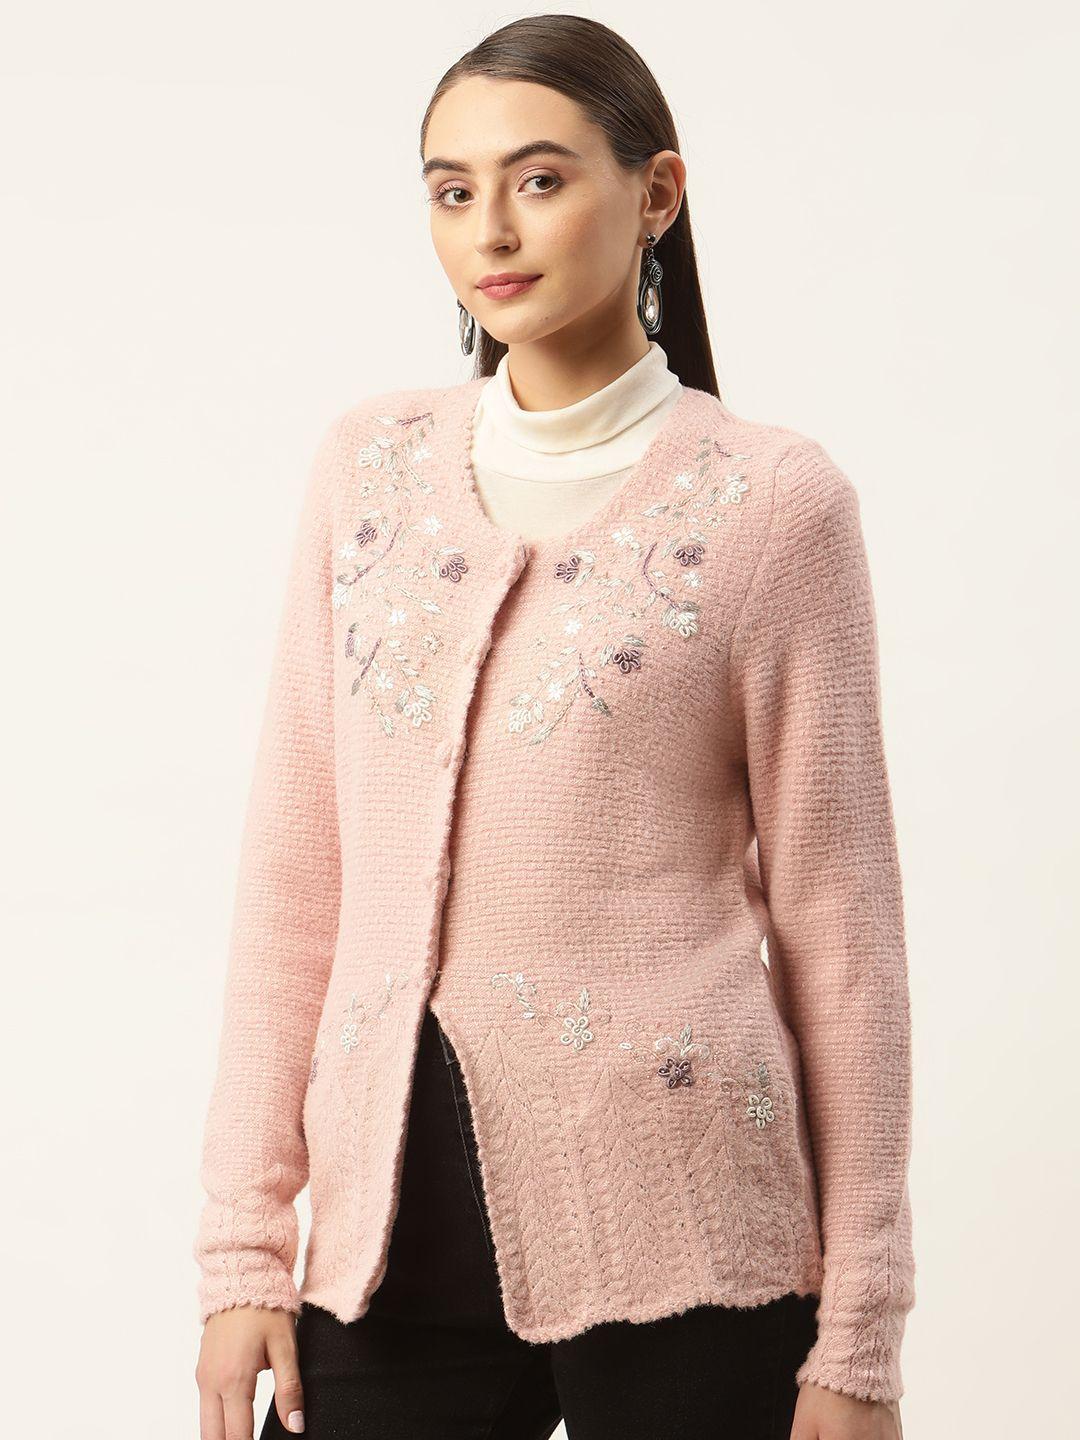 APSLEY Women Floral Embroidered Cardigan